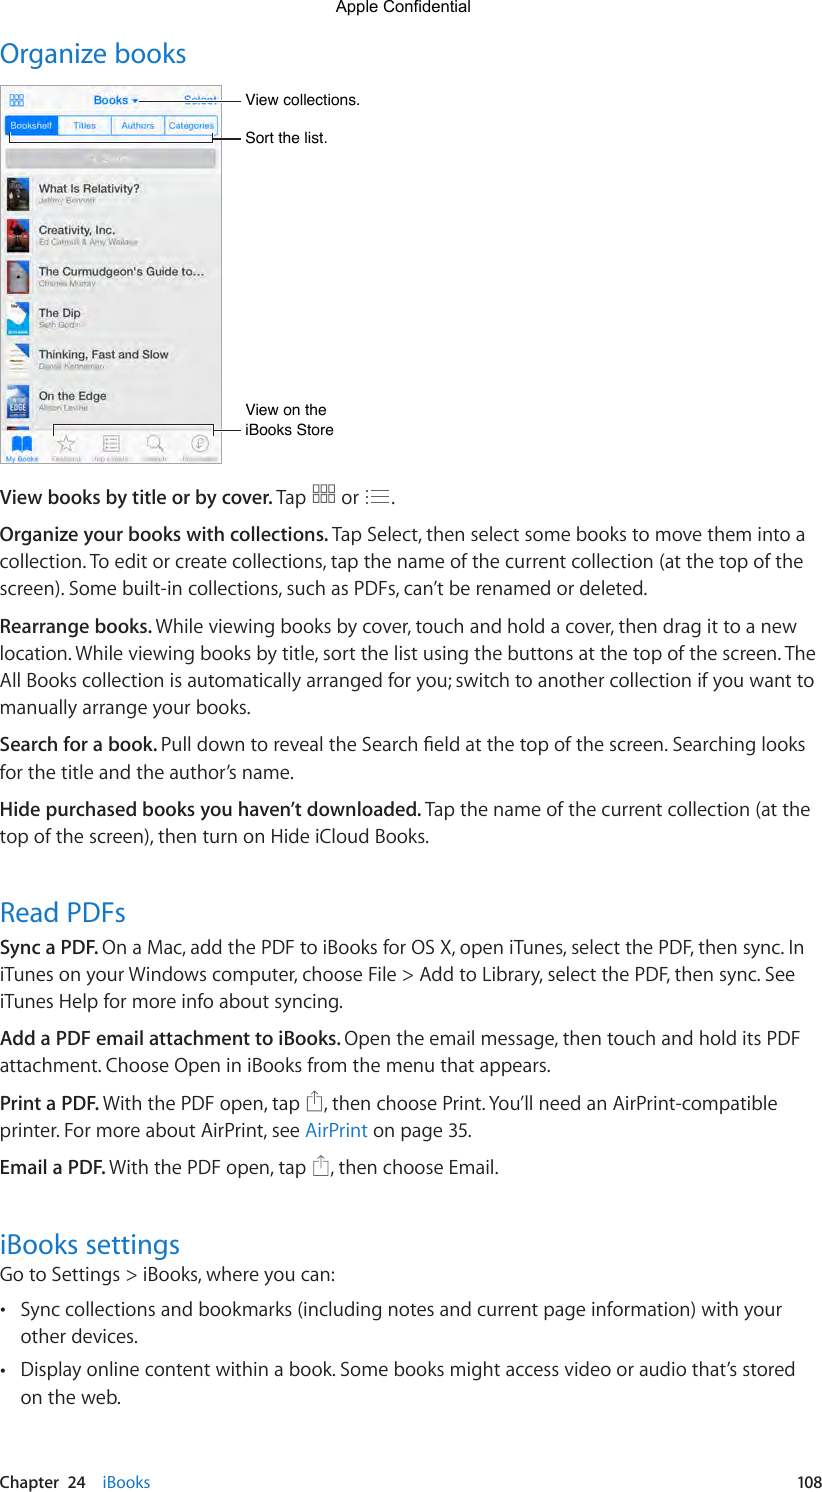 Chapter  24    iBooks  108Organize booksSort the list.Sort the list.View collections.View collections.View on the iBooks StoreView on the iBooks StoreView books by title or by cover. Tap   or  .Organize your books with collections. Tap Select, then select some books to move them into a collection. To edit or create collections, tap the name of the current collection (at the top of the screen). Some built-in collections, such as PDFs, can’t be renamed or deleted.Rearrange books. While viewing books by cover, touch and hold a cover, then drag it to a new location. While viewing books by title, sort the list using the buttons at the top of the screen. The All Books collection is automatically arranged for you; switch to another collection if you want to manually arrange your books.Search for a book. PulldowntorevealtheSearcheldatthetopofthescreen.Searchinglooksfor the title and the author’s name. Hide purchased books you haven’t downloaded. Tap the name of the current collection (at the top of the screen), then turn on Hide iCloud Books.Read PDFsSync a PDF. On a Mac, add the PDF to iBooks for OS X, open iTunes, select the PDF, then sync. In iTunes on your Windows computer, choose File &gt; Add to Library, select the PDF, then sync. See iTunes Help for more info about syncing.Add a PDF email attachment to iBooks. Open the email message, then touch and hold its PDF attachment. Choose Open in iBooks from the menu that appears.Print a PDF. With the PDF open, tap  , then choose Print. You’ll need an AirPrint-compatible printer. For more about AirPrint, see AirPrint on page 35.Email a PDF. With the PDF open, tap  , then choose Email.iBooks settingsGo to Settings &gt; iBooks, where you can: •Sync collections and bookmarks (including notes and current page information) with yourother devices. •Display online content within a book. Some books might access video or audio that’s storedon the web.Apple Confidential